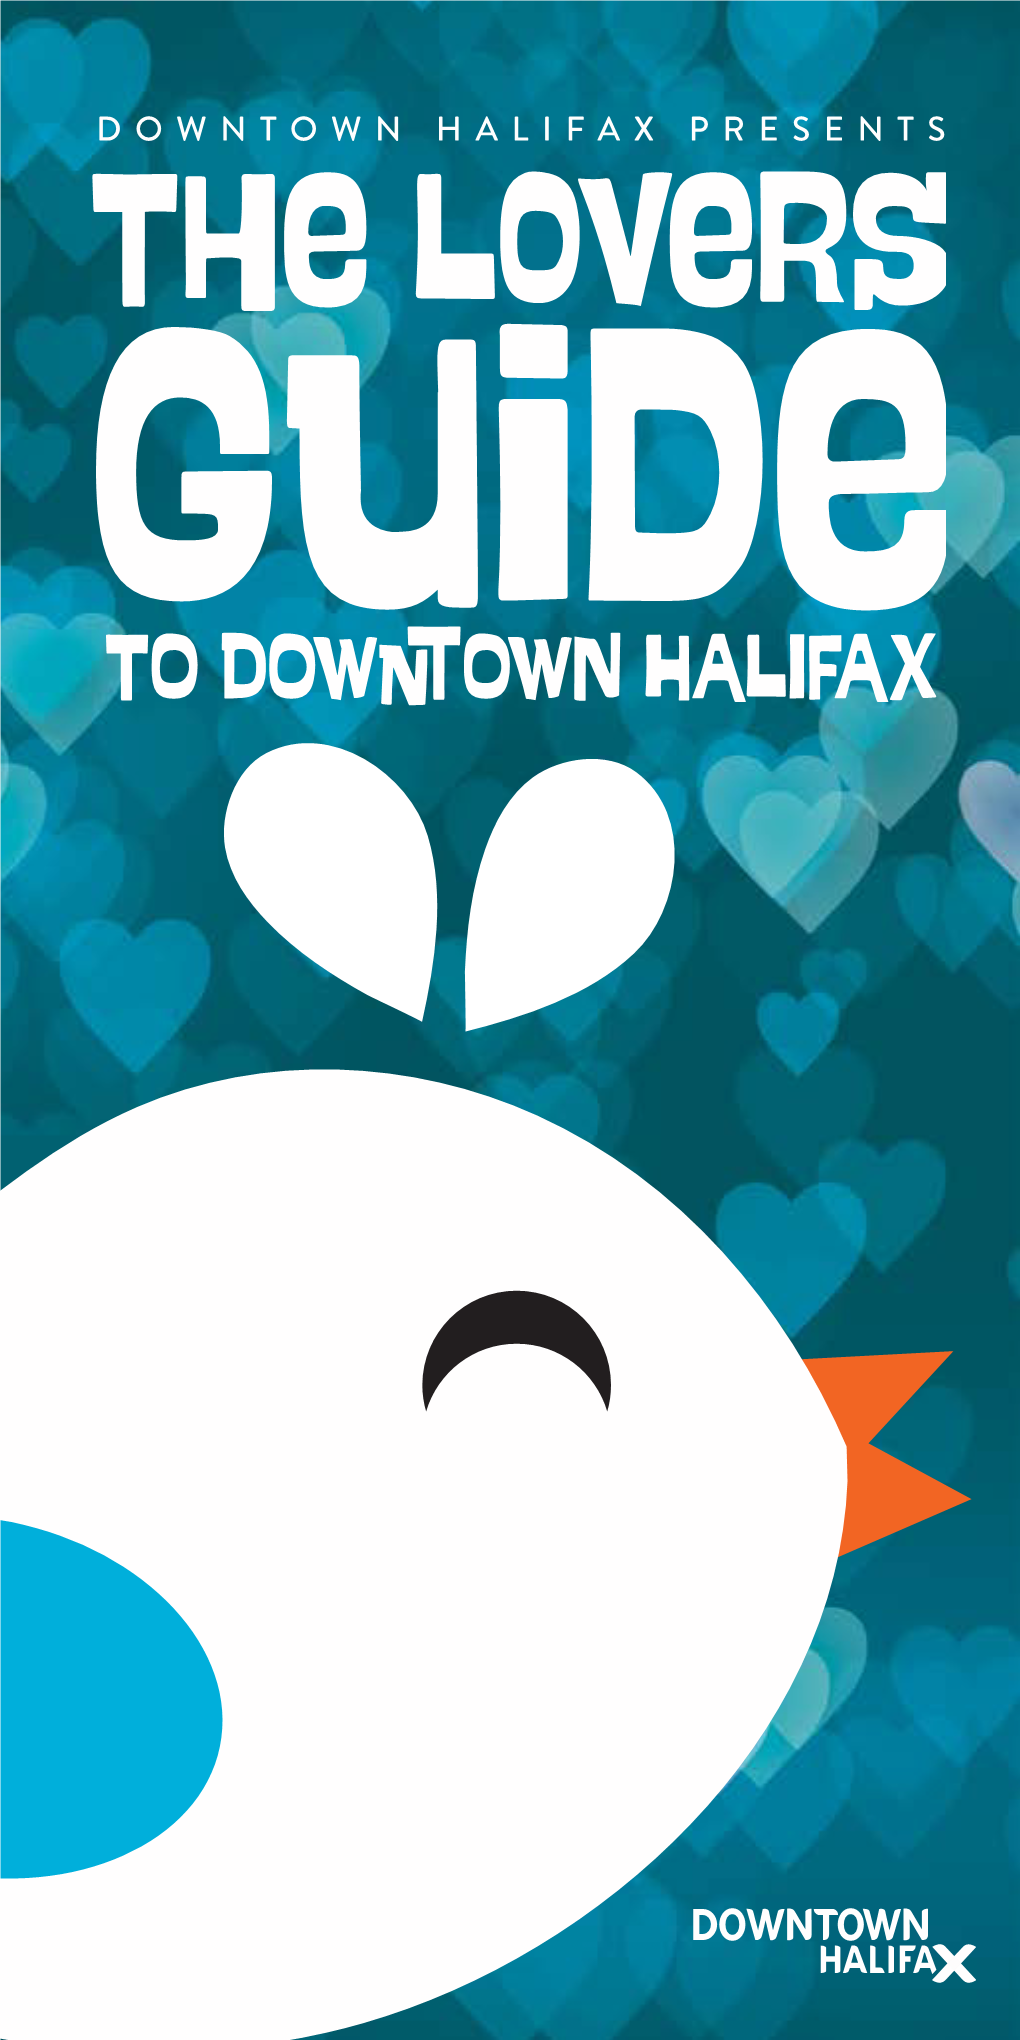 TO DOW OWN HALIFAX Love Is in the Air!